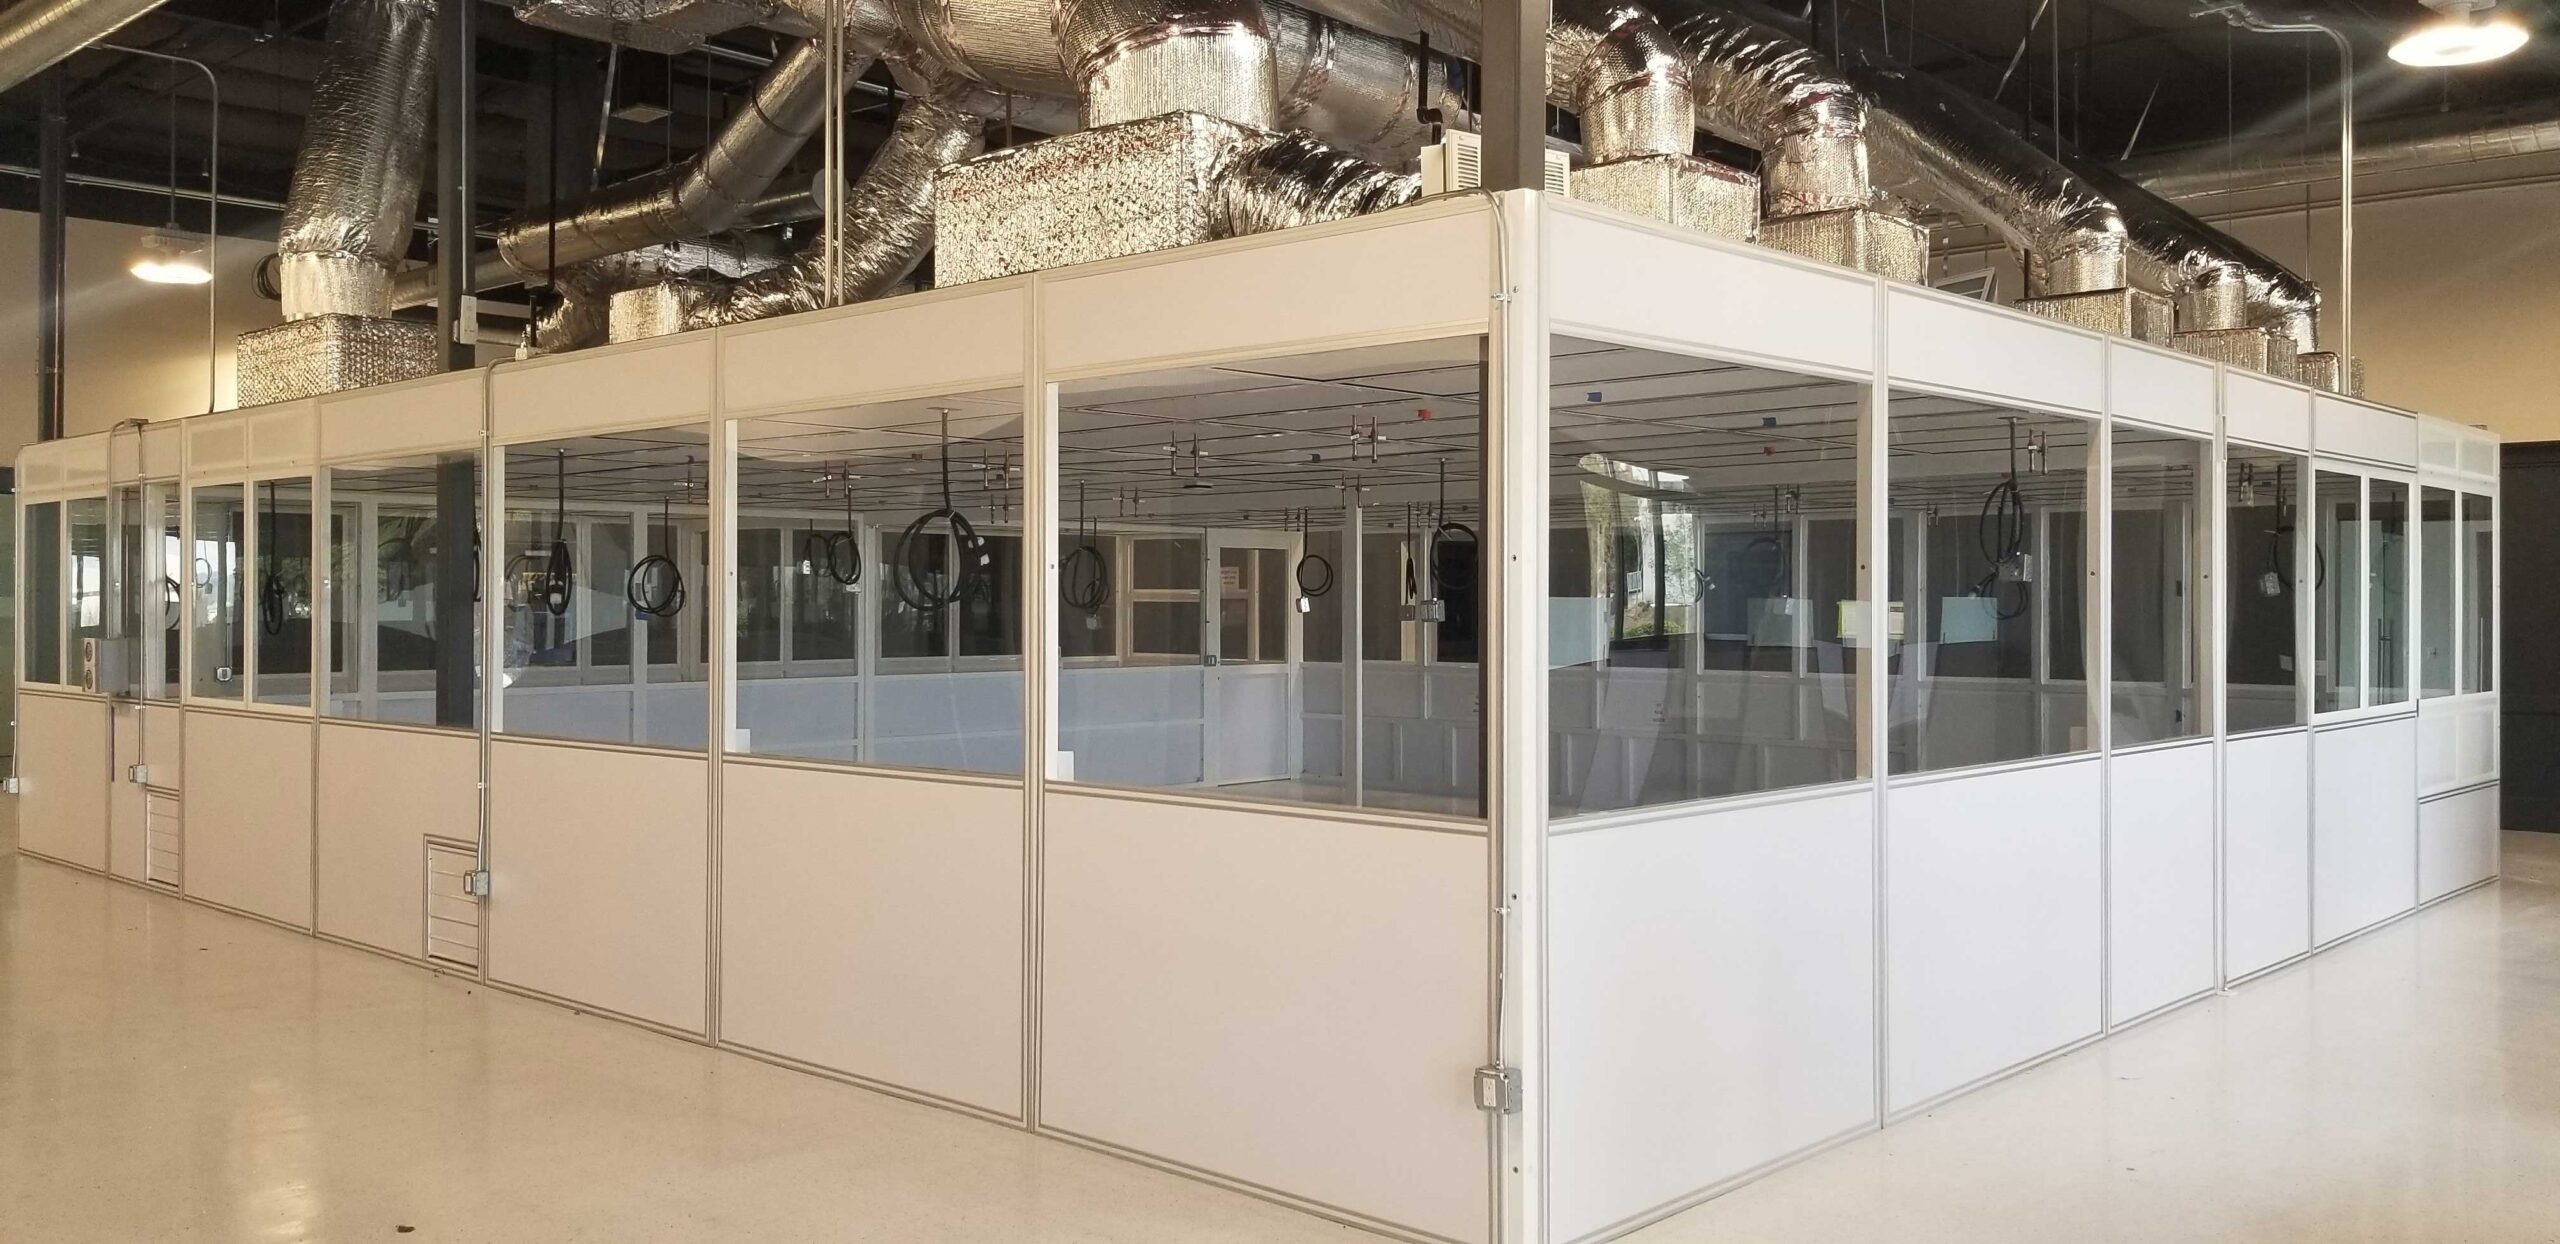 Clean Room or Lab Space For Rent San Jose or Lease in San Jose, California | Fumehood | Flowhood - RENT A LAB Thumbnail